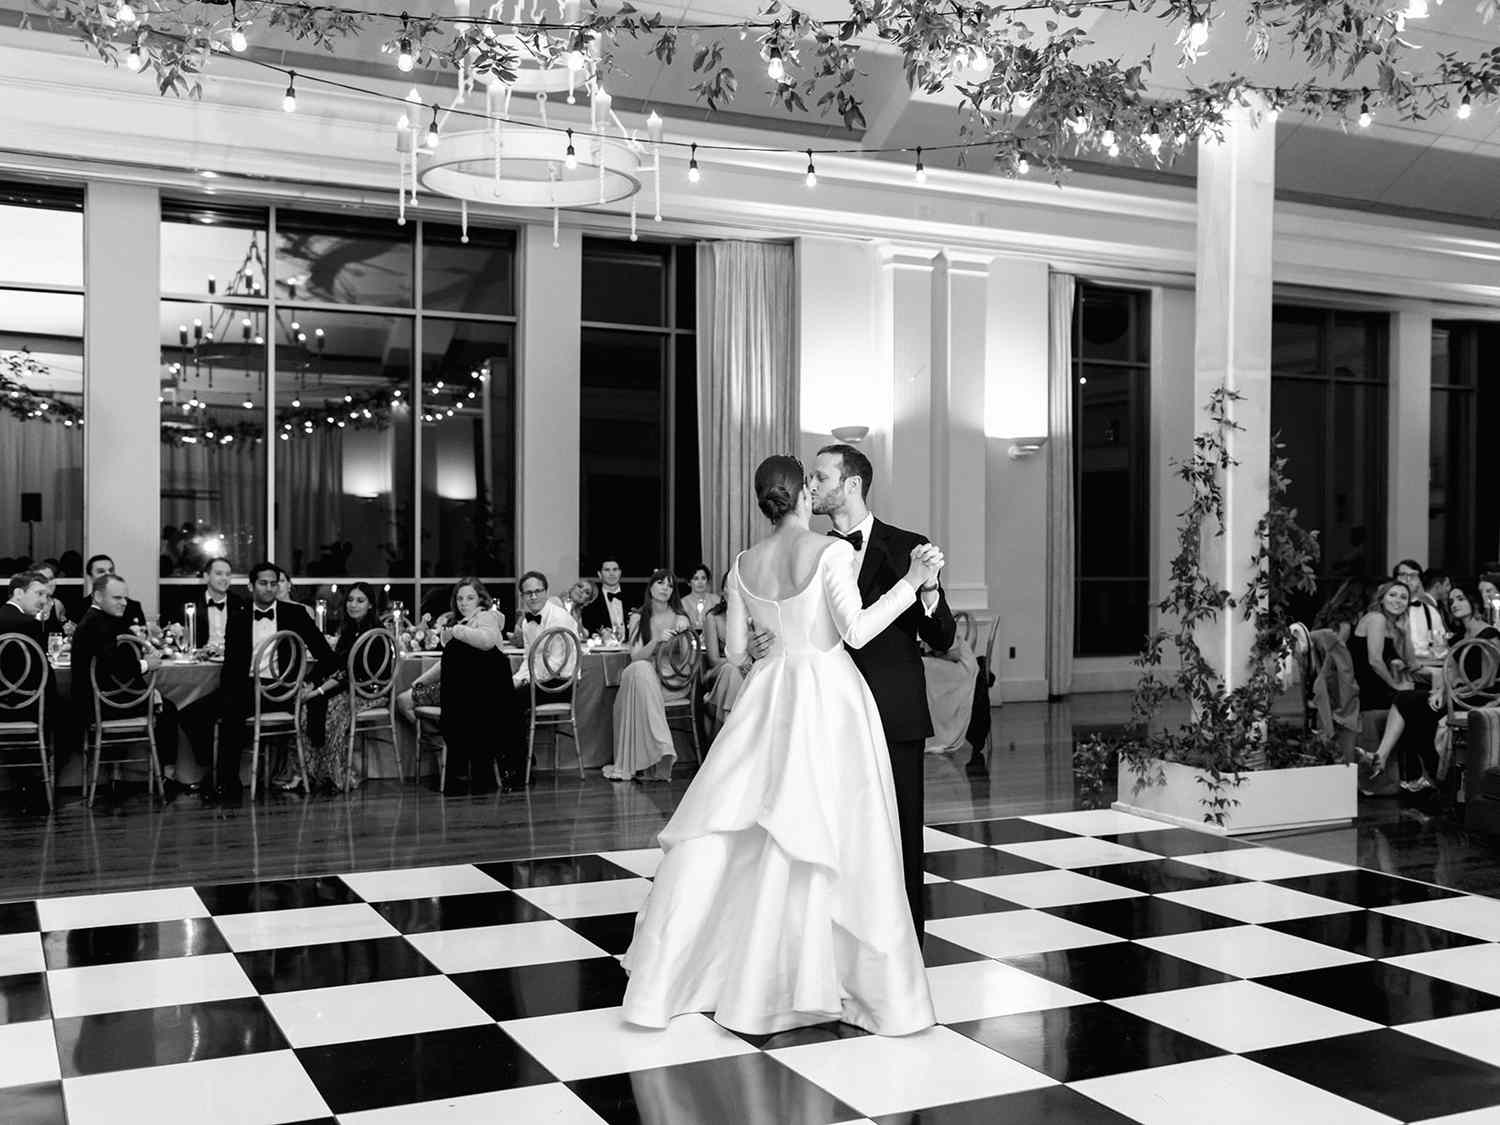 bride and groom sharing their first dance on checked dance floor